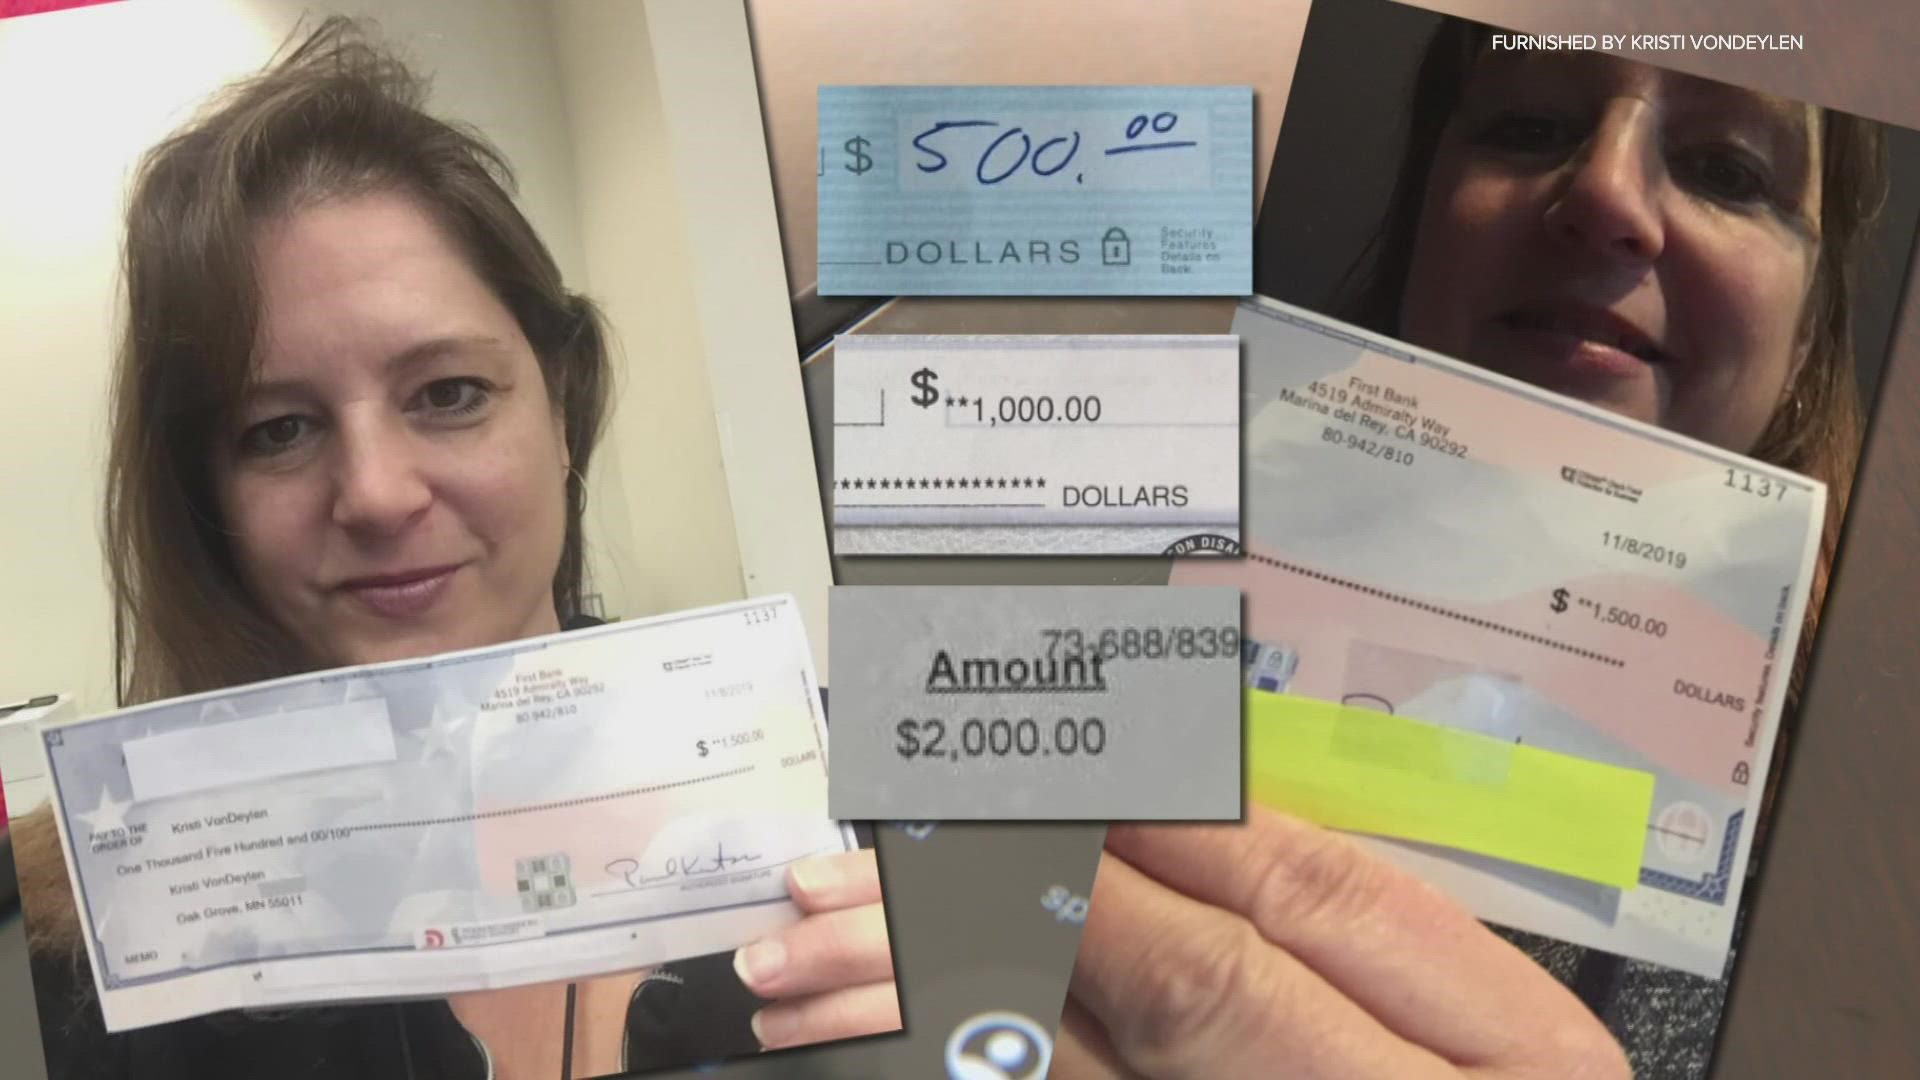 This woman has turned the tables on the illegal callers, using a system to get them to pay her. Kristi VonDeylen has netted settlements worth $42,000.